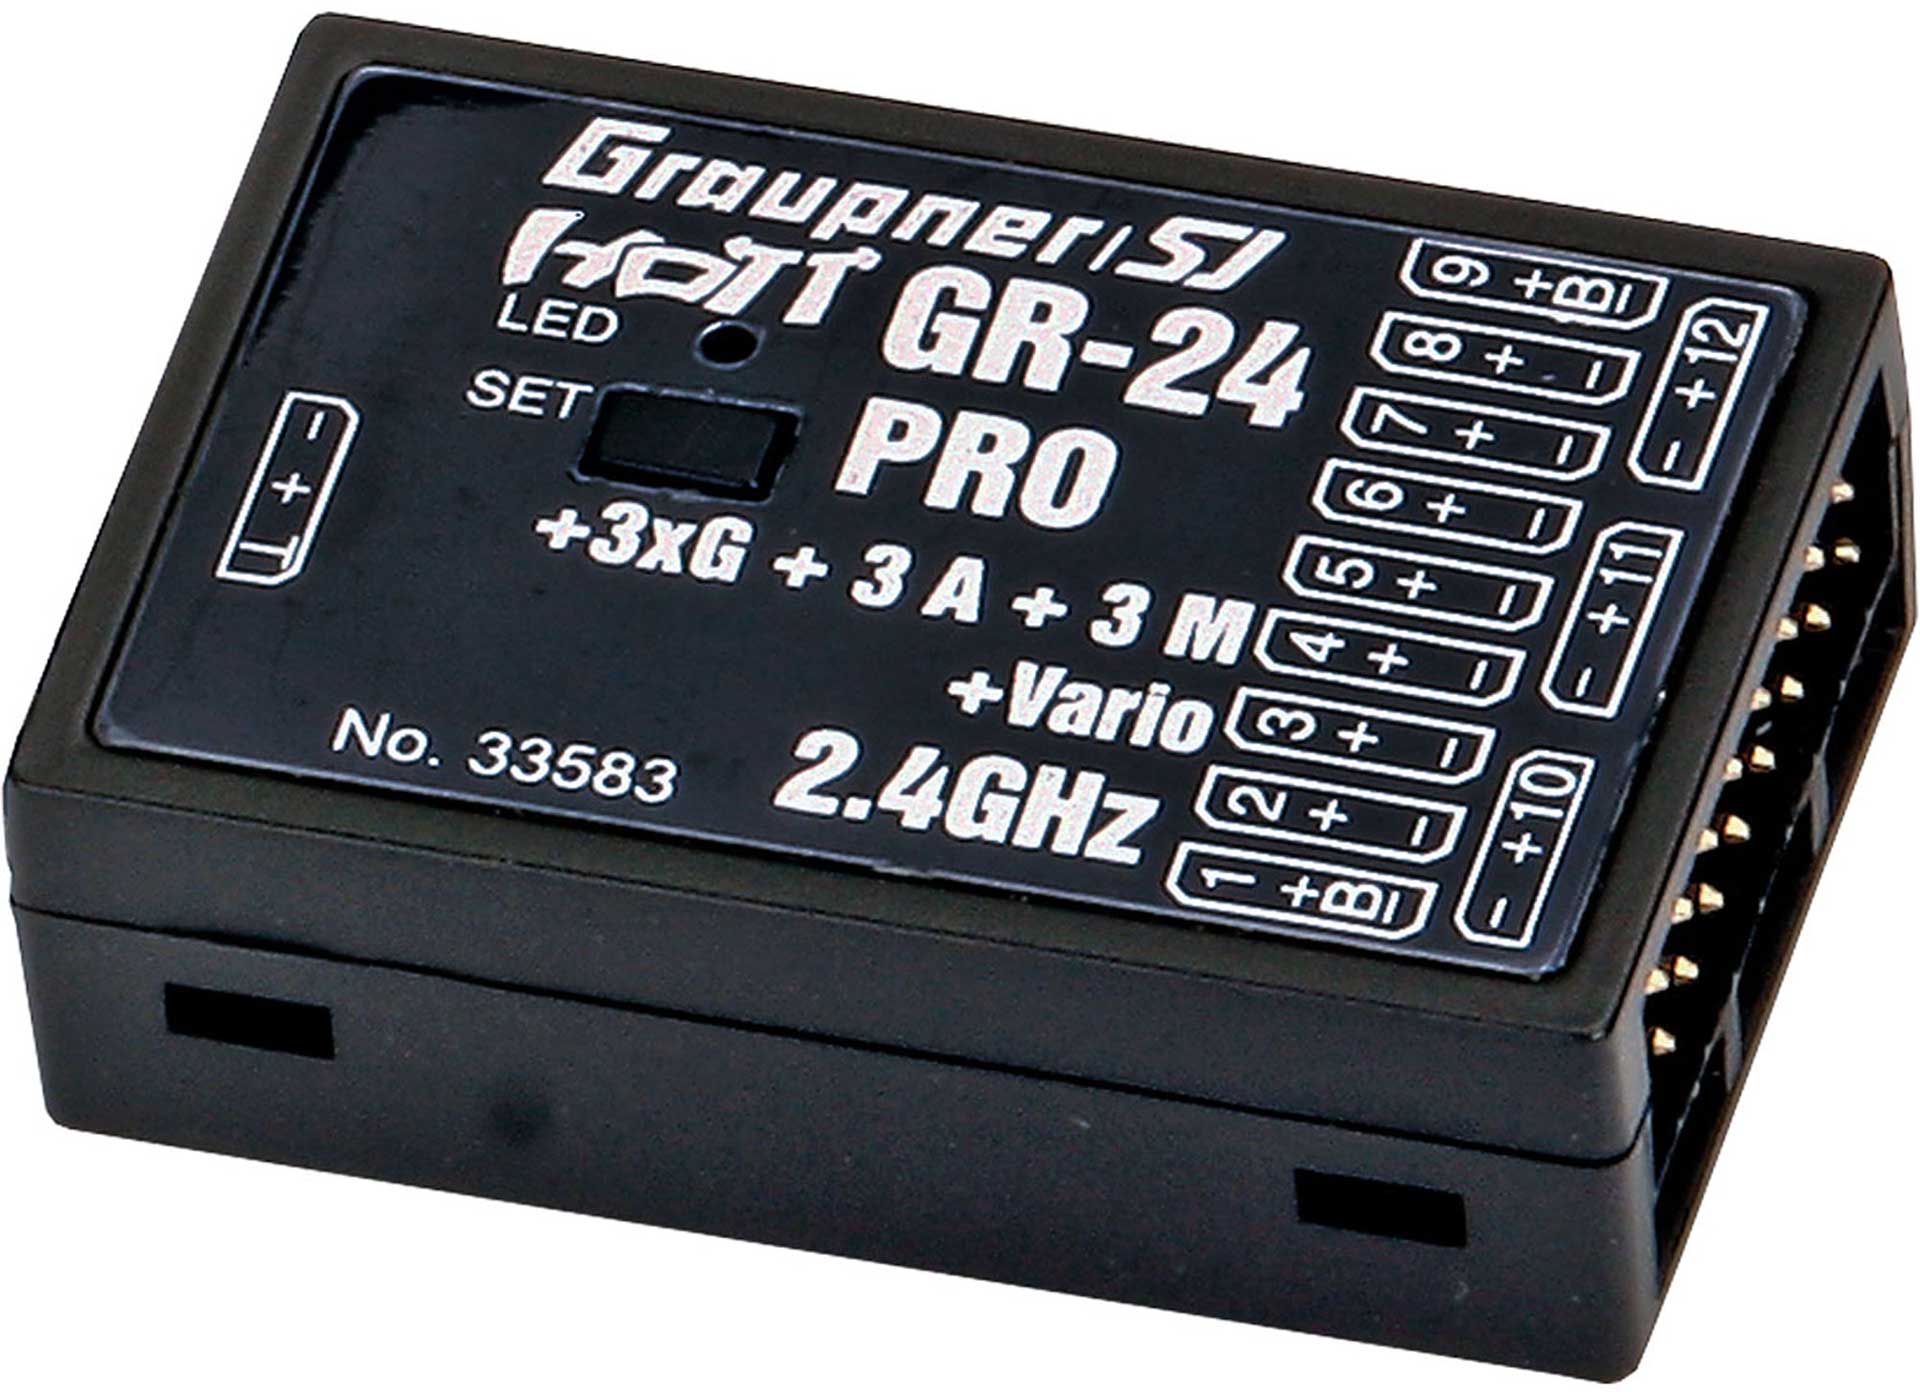 GRAUPNER GR-24 PER 3XG + 3A + 3M + VARIO 2,4GHZ HOTT WITH 3-AXIS GYRO AND VARIO RECEIVER